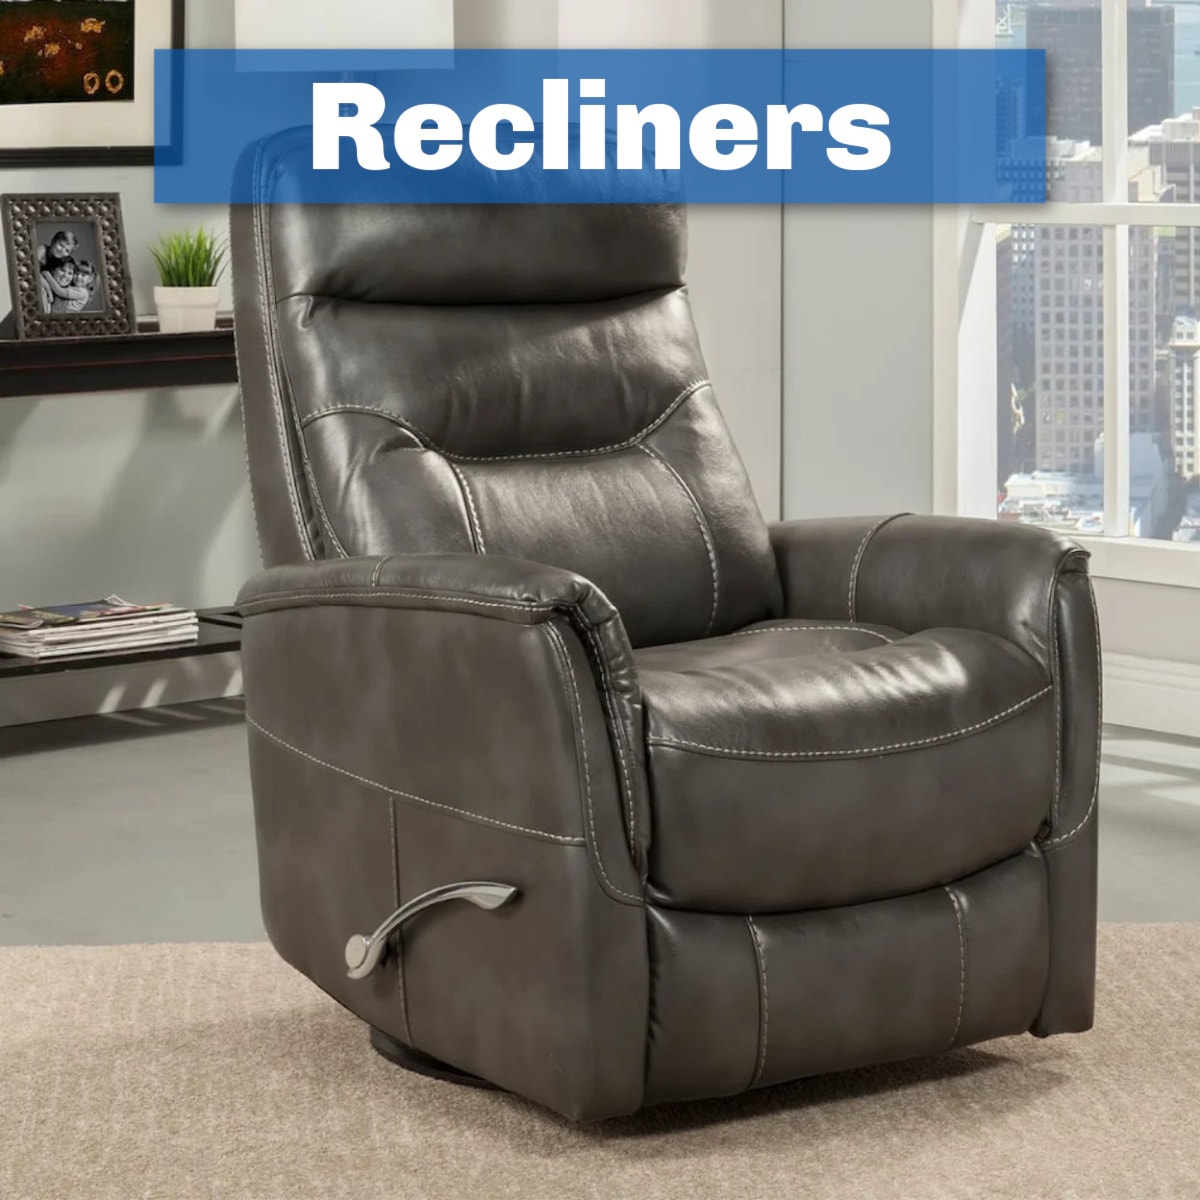 recliners image